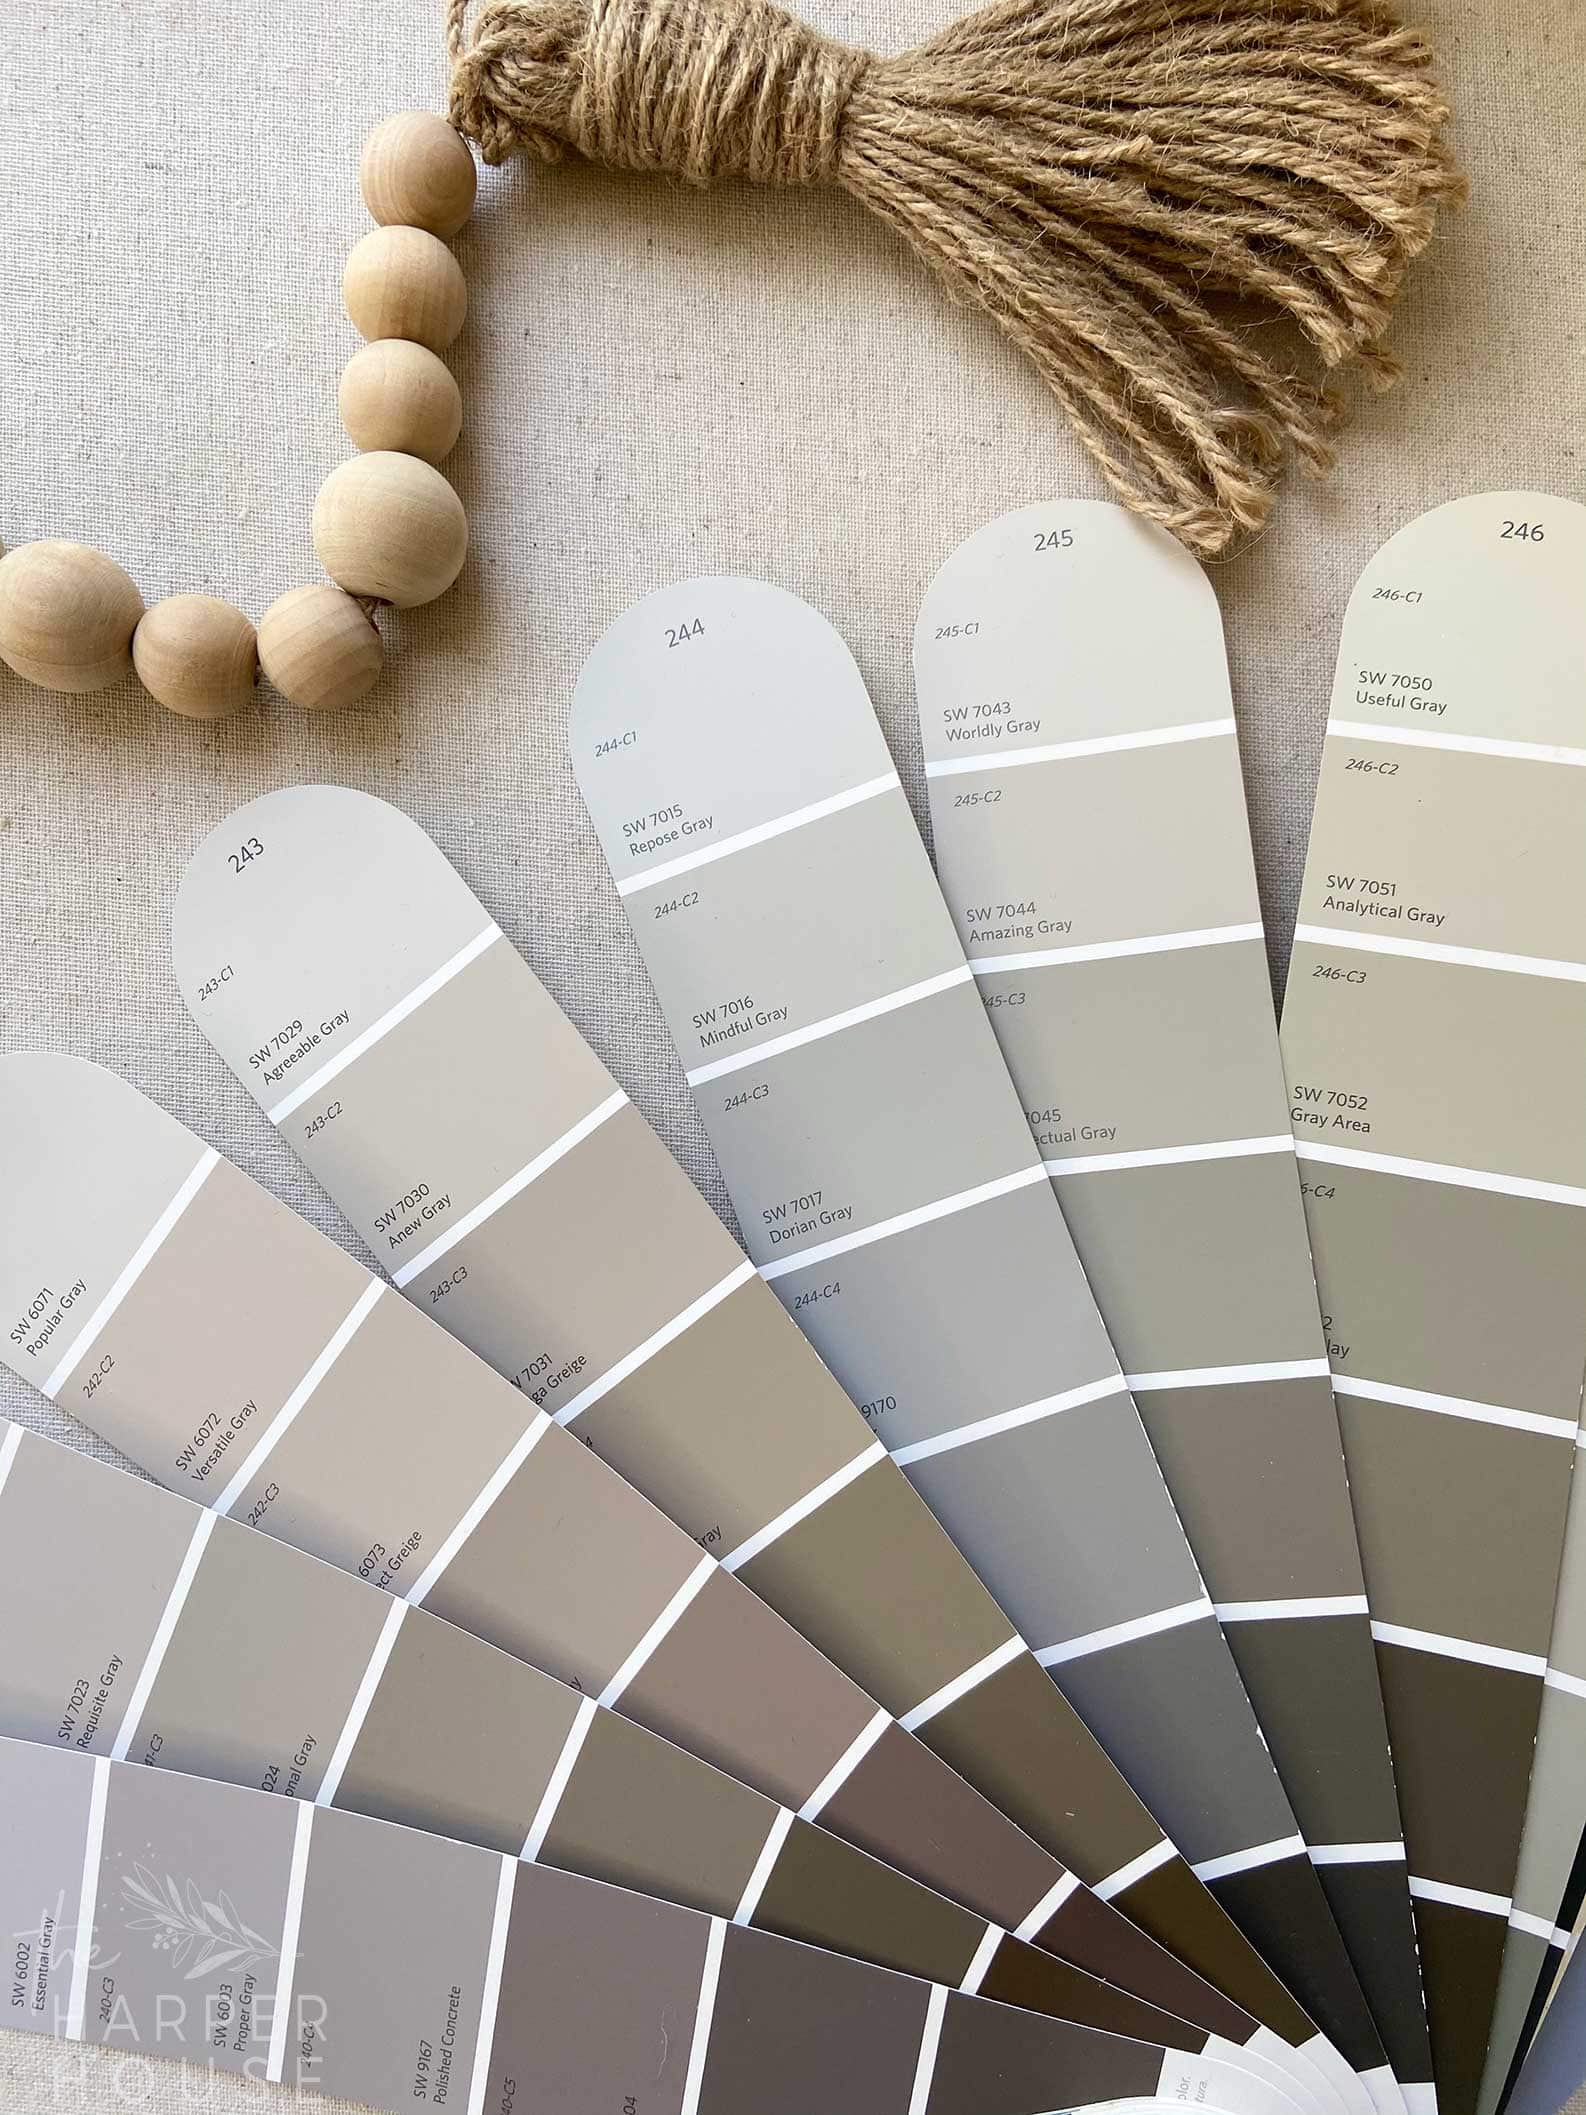 The 16 Best Wall Colors to Update Cream Cabinets & Trim - Kylie M